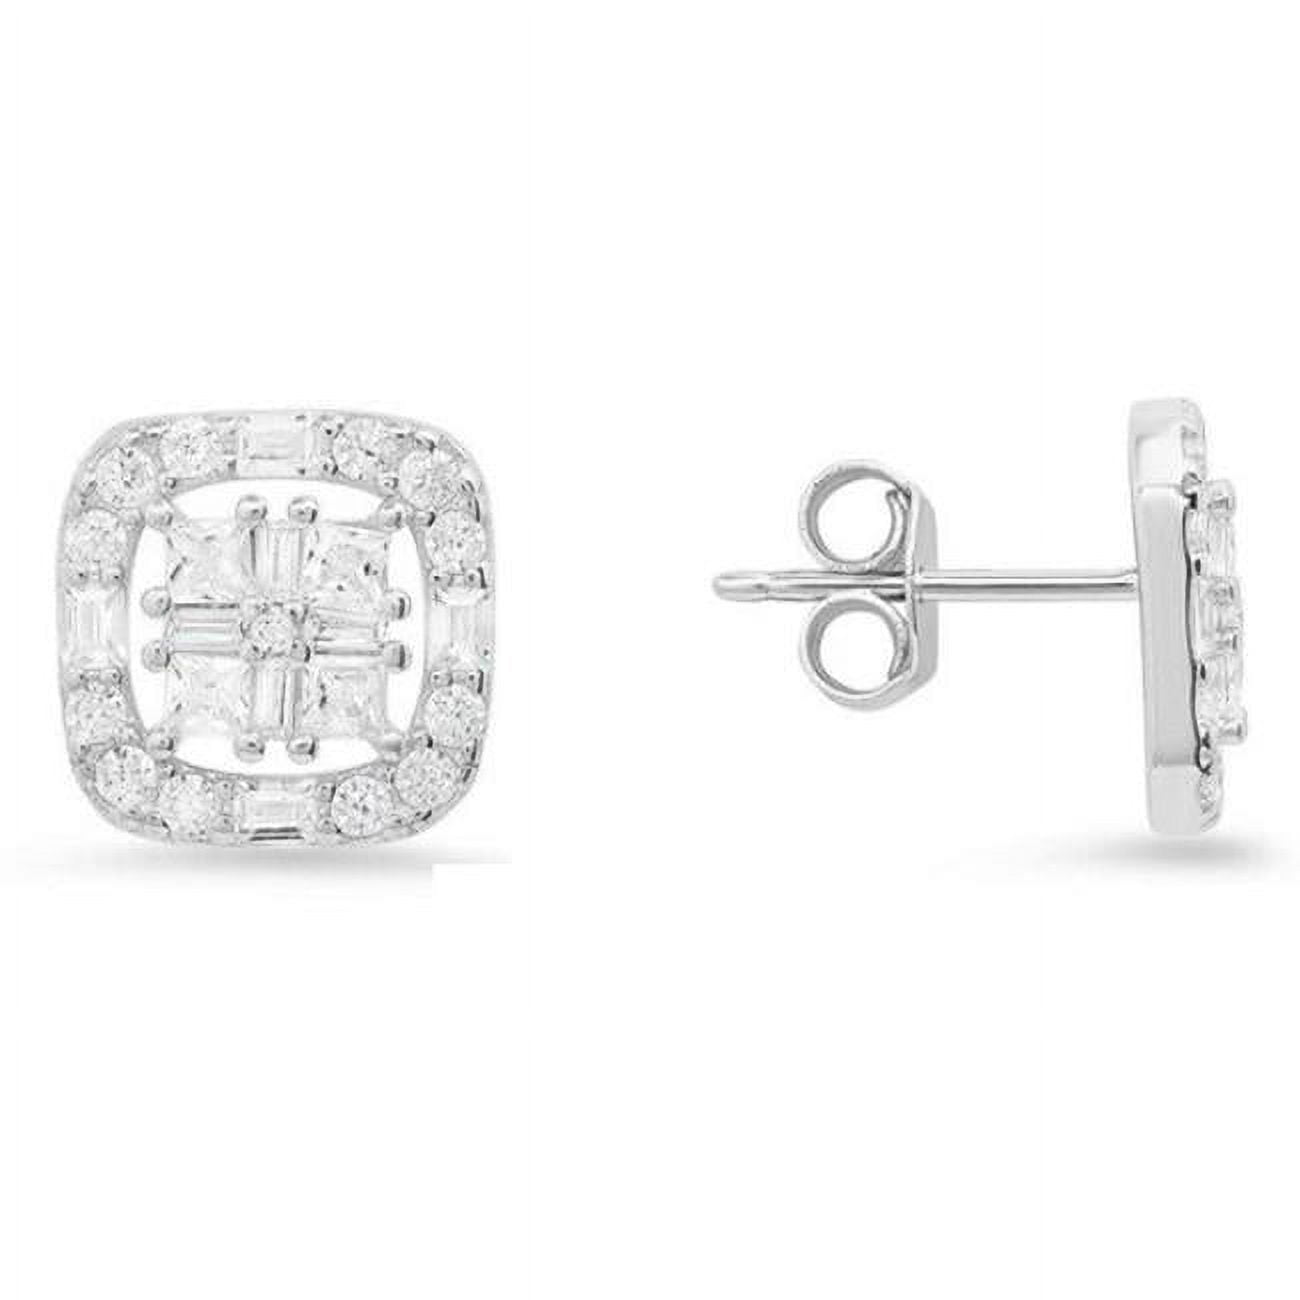 Picture of 212 Main 04-039-DSE Womens Sterling Silver Princess & Baguette Cubic Zirconia Halo Stud Earrings